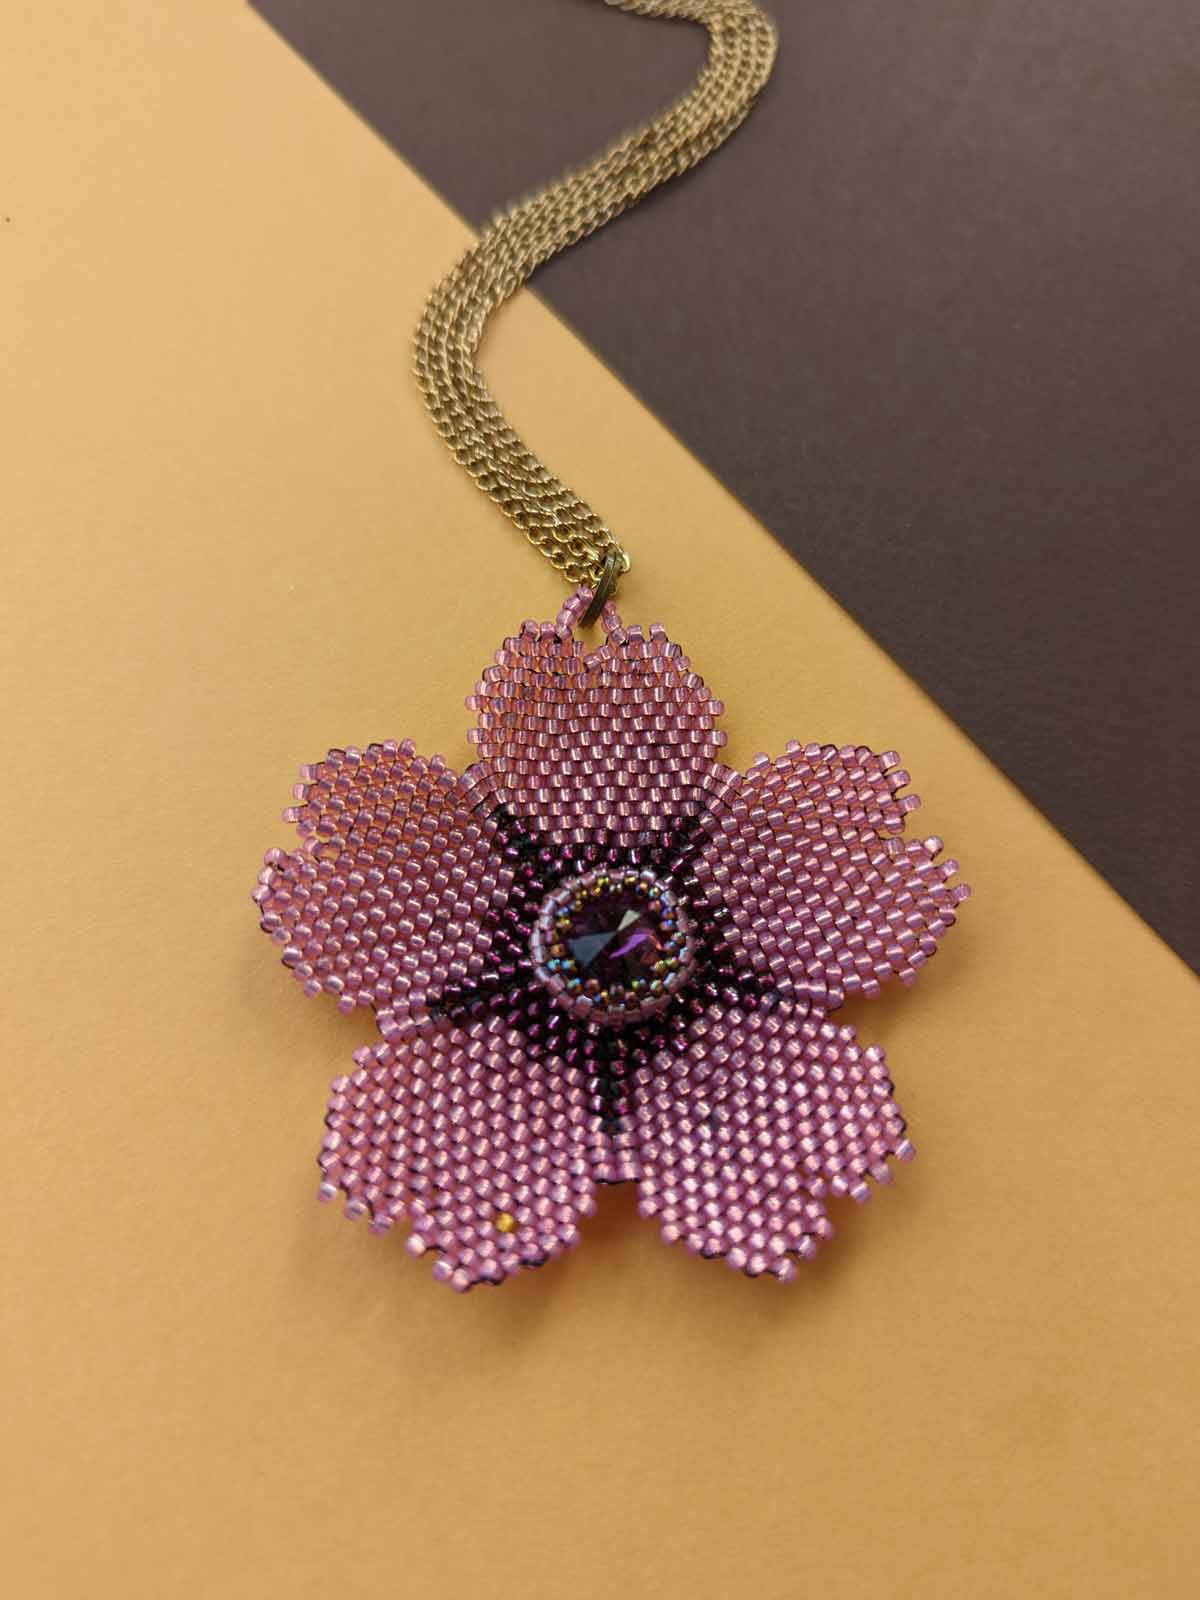 Buy Multi Color Seed Beaded Flower Necklace (20 Inches) at ShopLC.